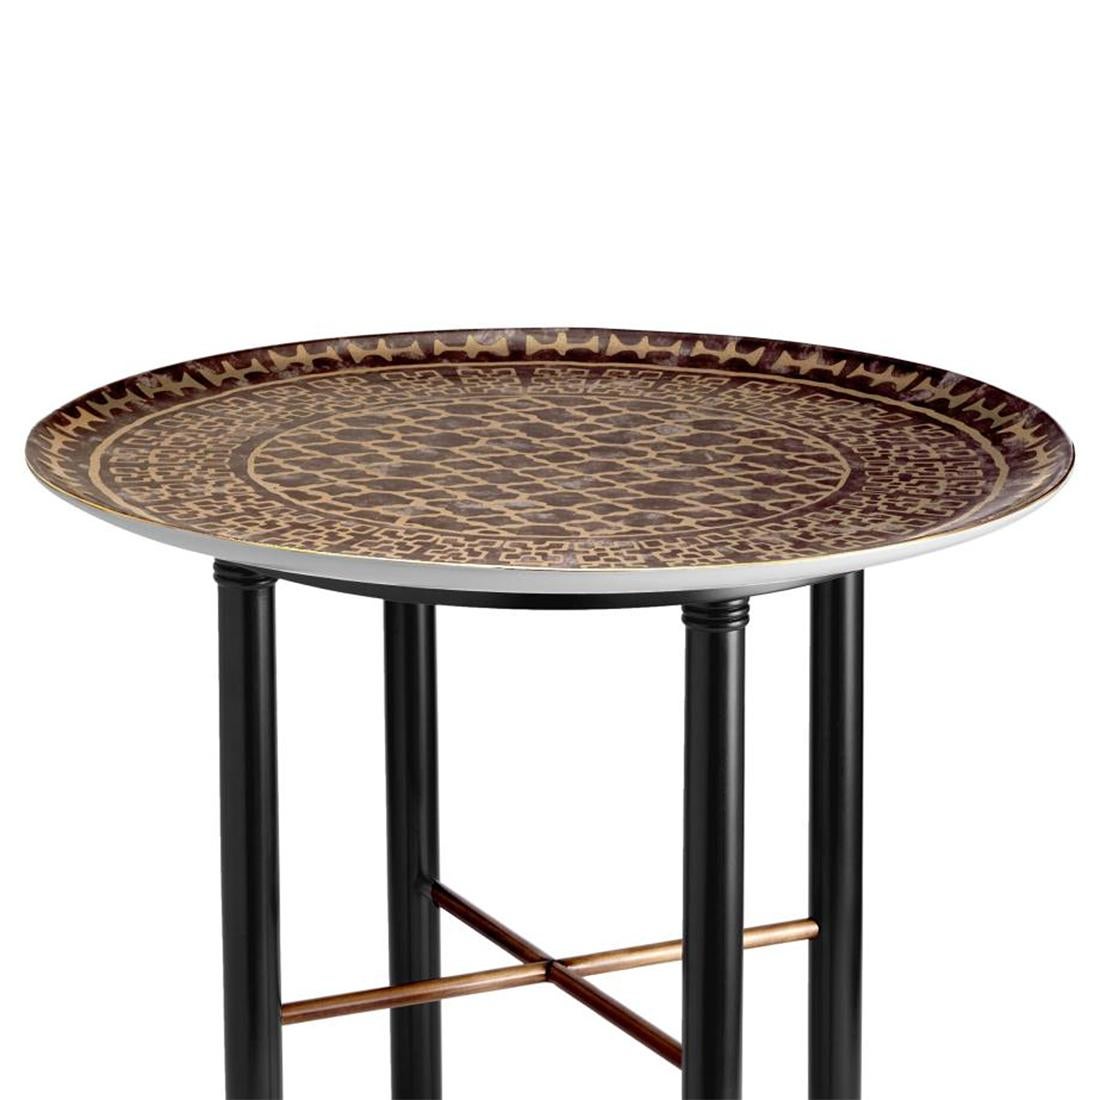 Side table callas large with earthenware top
with brass paint finish. Base in solid mahogany
wood in black paint finish with mahogany crossed
in natural finish.
Also available in side table callas medium on request.